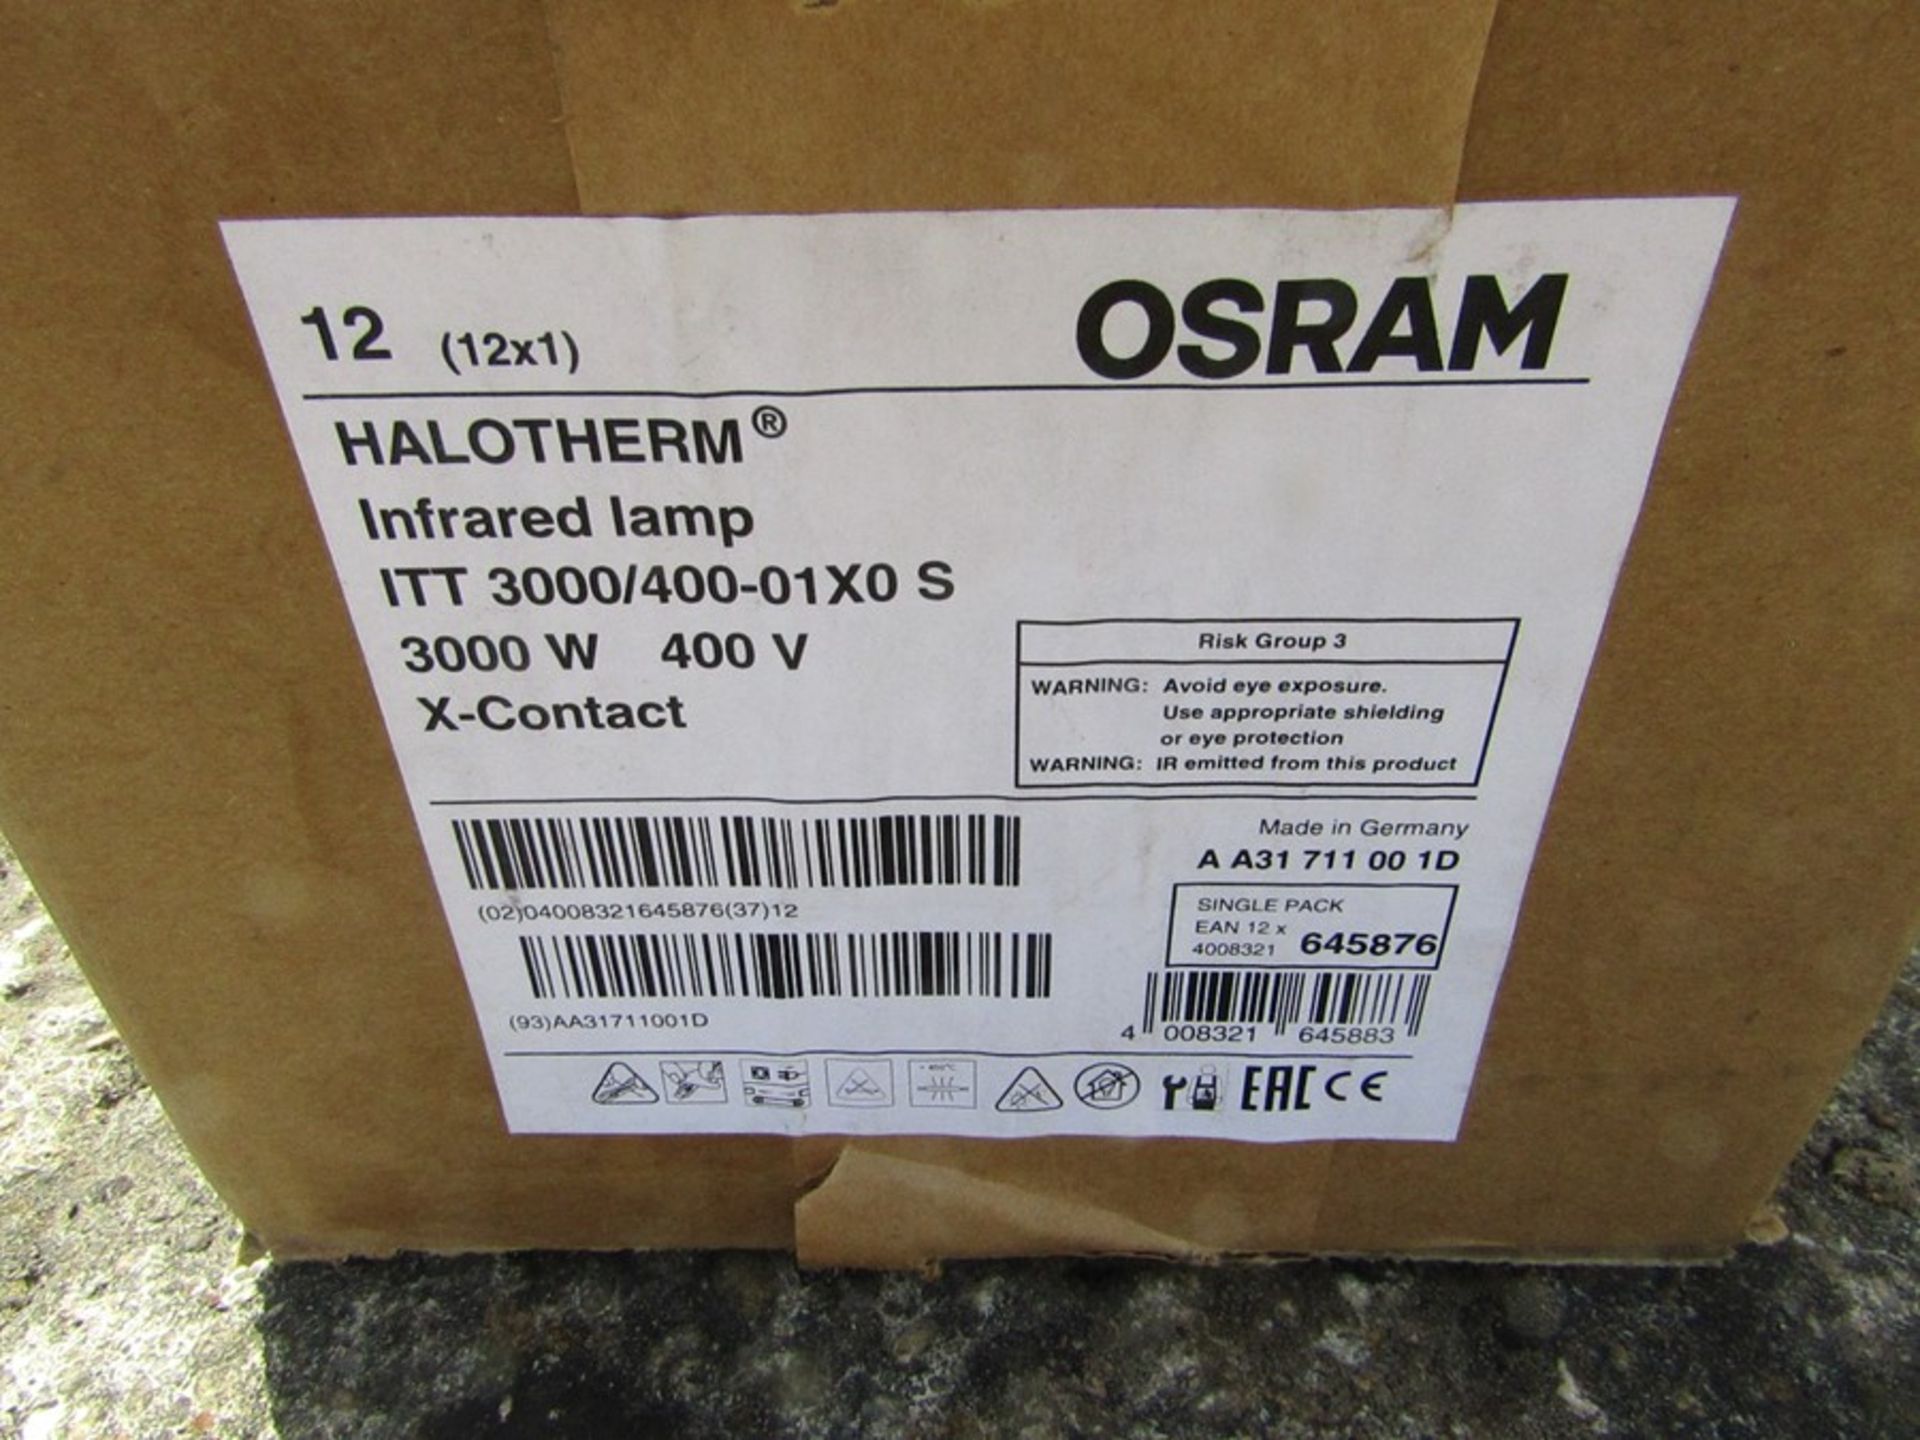 Box of 12 Osram Halotherm Infrared Lamps 3000W 400V